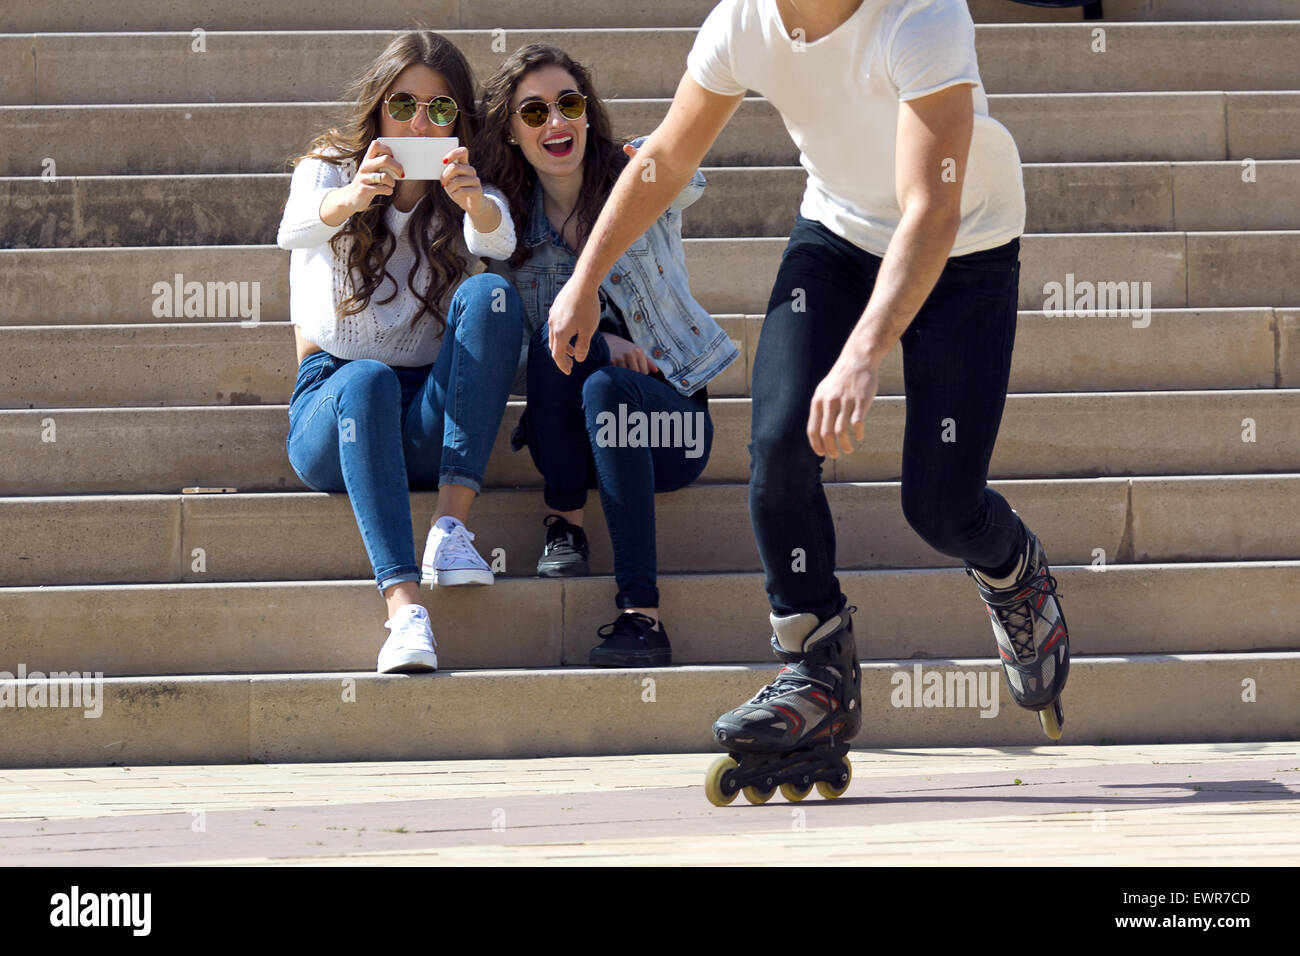 Roller skating boy with friends in town Stock Photo